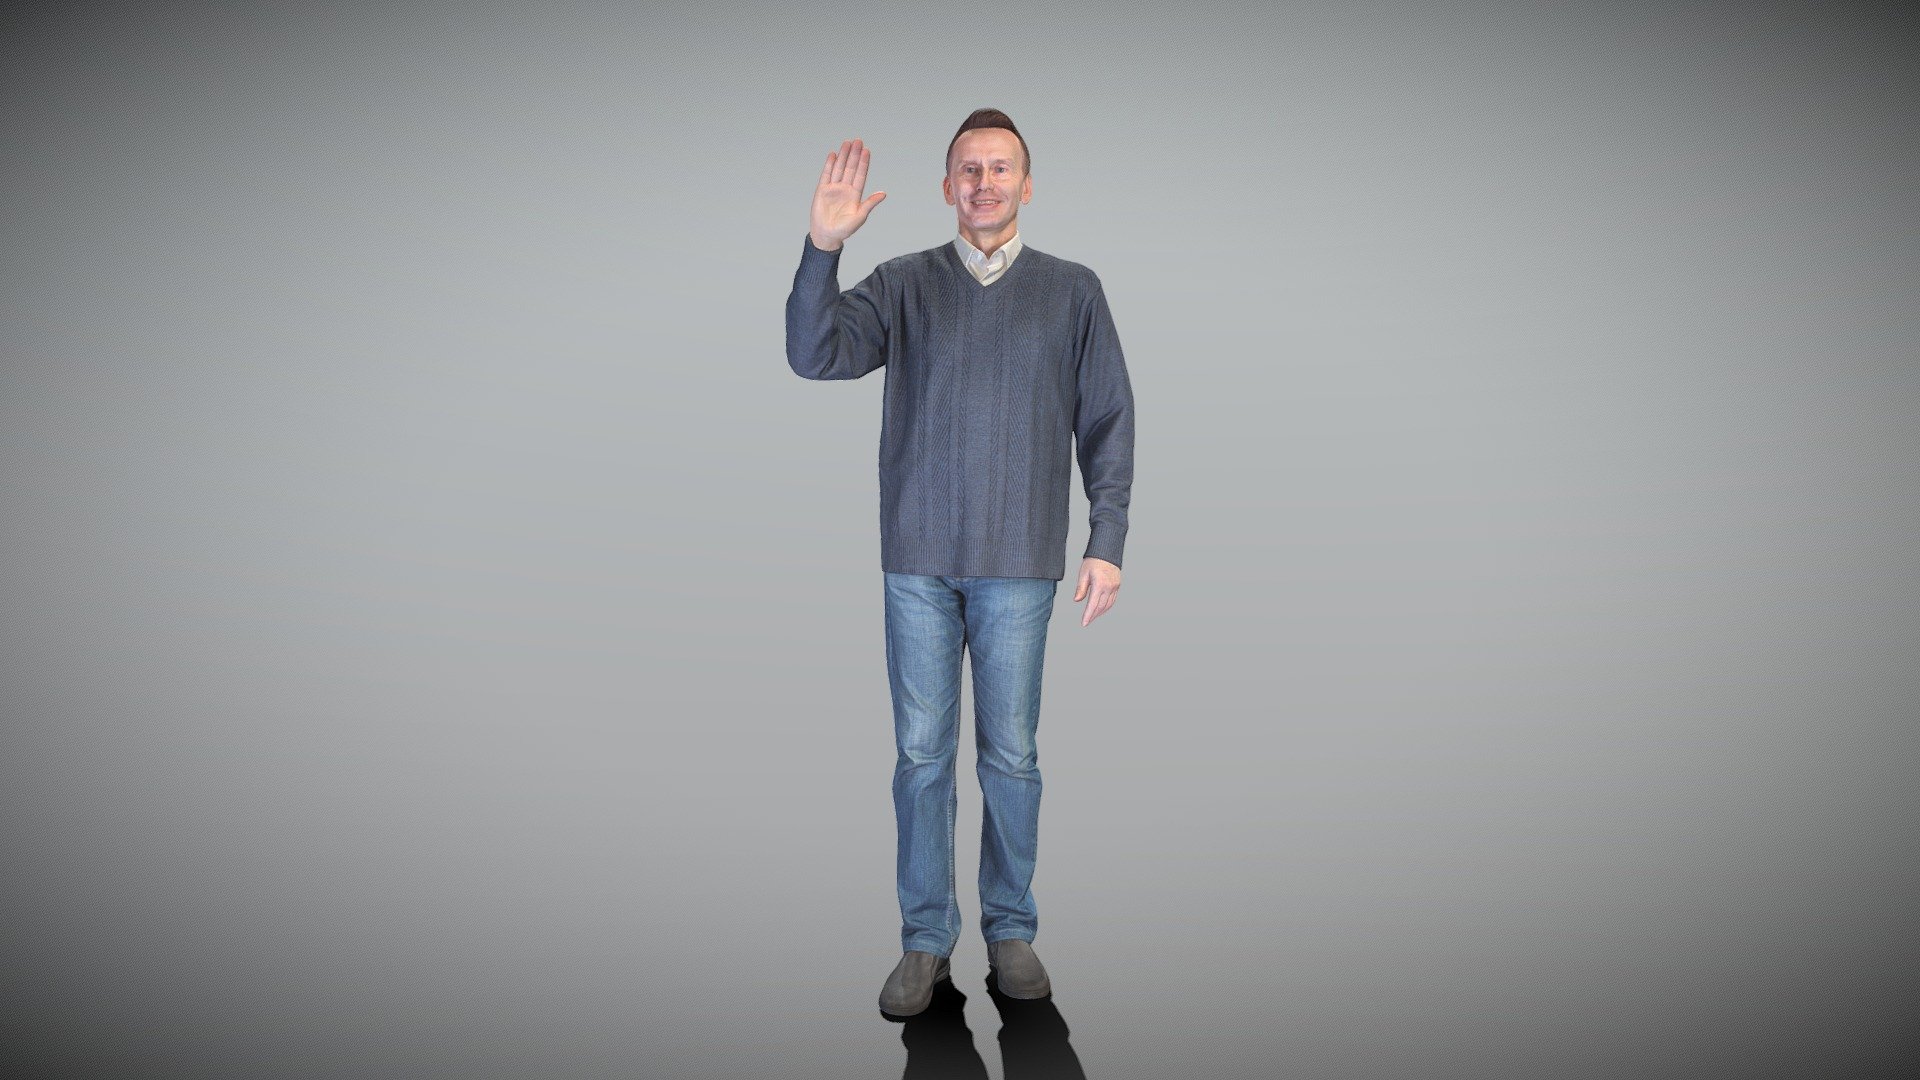 This is a true human size and detailed model of a handsome man of Caucasian appearance dressed in casual style. The model is captured in casual pose to be perfectly matching to variety of architectural visualization, background character, product visualization e.g. urban installations, city designs, outdoor design presentations, VR/AR content, etc.

Technical specifications:




digital double 3d scan model

150k &amp; 30k triangles | double triangulated

high-poly model (.ztl tool with 5 subdivisions) clean and retopologized automatically via ZRemesher

sufficiently clean

PBR textures 8K resolution: Diffuse, Normal, Specular maps

non-overlapping UV map

no extra plugins are required for this model

Download package includes a Cinema 4D project file with Redshift shader, OBJ, FBX, STL files, which are applicable for 3ds Max, Maya, Unreal Engine, Unity, Blender, etc. All the textures you will find in the “Tex” folder, included into the main archive.

3D EVERYTHING

Stand with Ukraine! - Man in sweater waving 406 - Buy Royalty Free 3D model by deep3dstudio 3d model